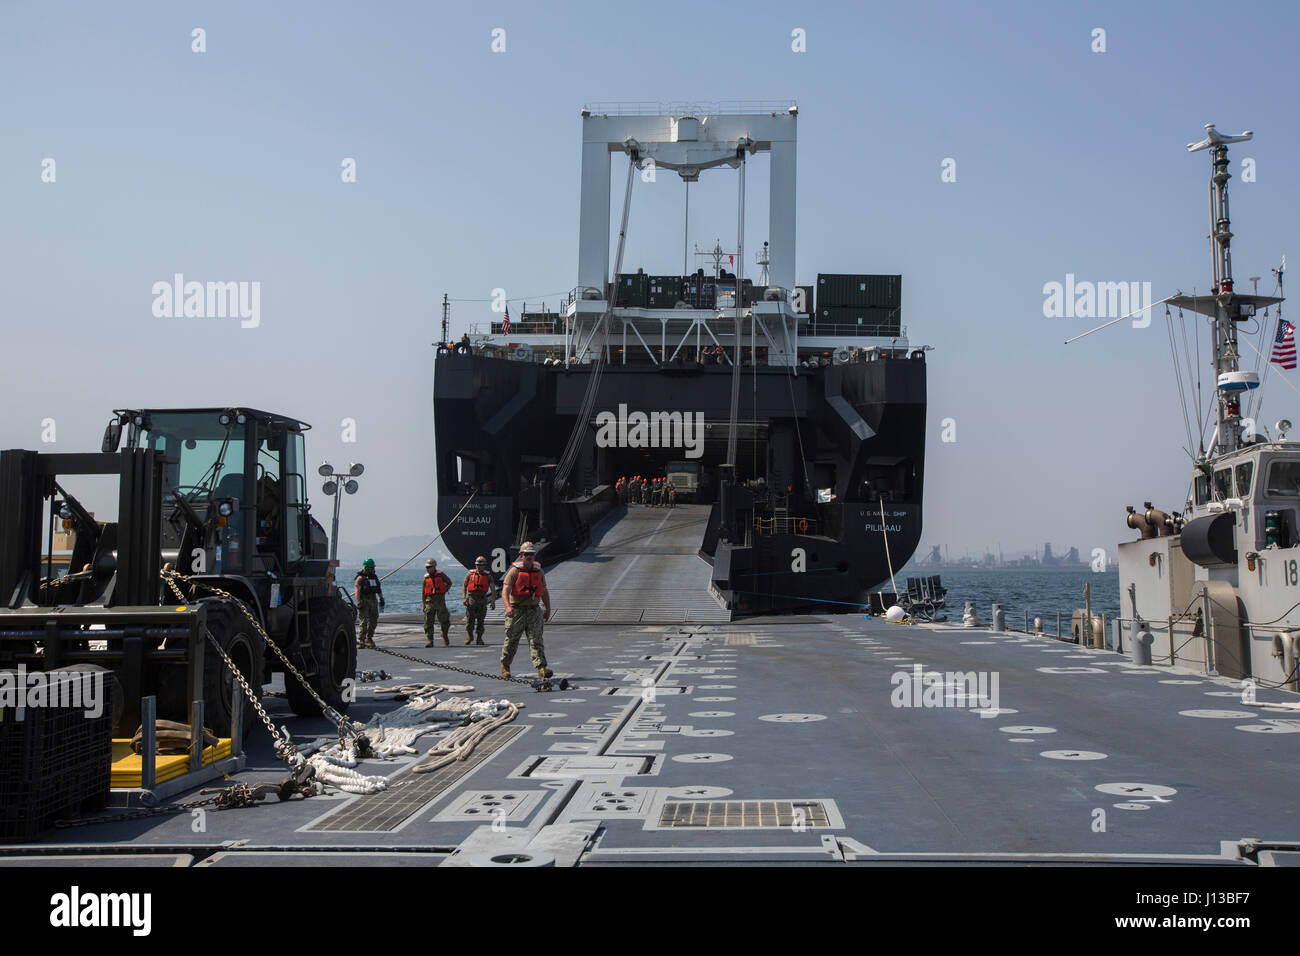 U.S. Marines, Sailors, and Coast Guardsmen aboard the USNS Pililaau conduct loading and off loading of cargo and gear during Combined Joint Logistics Over The Shore (CJ LOTS) Exercise in the Republic of Korea (ROK) in the Sea of Japan, Pohang, Korea, April 13, 2017. CJ LOTS is an exercise designed to train U.S. and ROK service members to accomplish vital logistical measures in a strategic area while strengthening communication and cooperation between the U.S. and ROK alliance. (U.S. Marine Corps photo by MCIPAC Combat Camera Lance Cpl. Antonia E. Mercado) Stock Photo